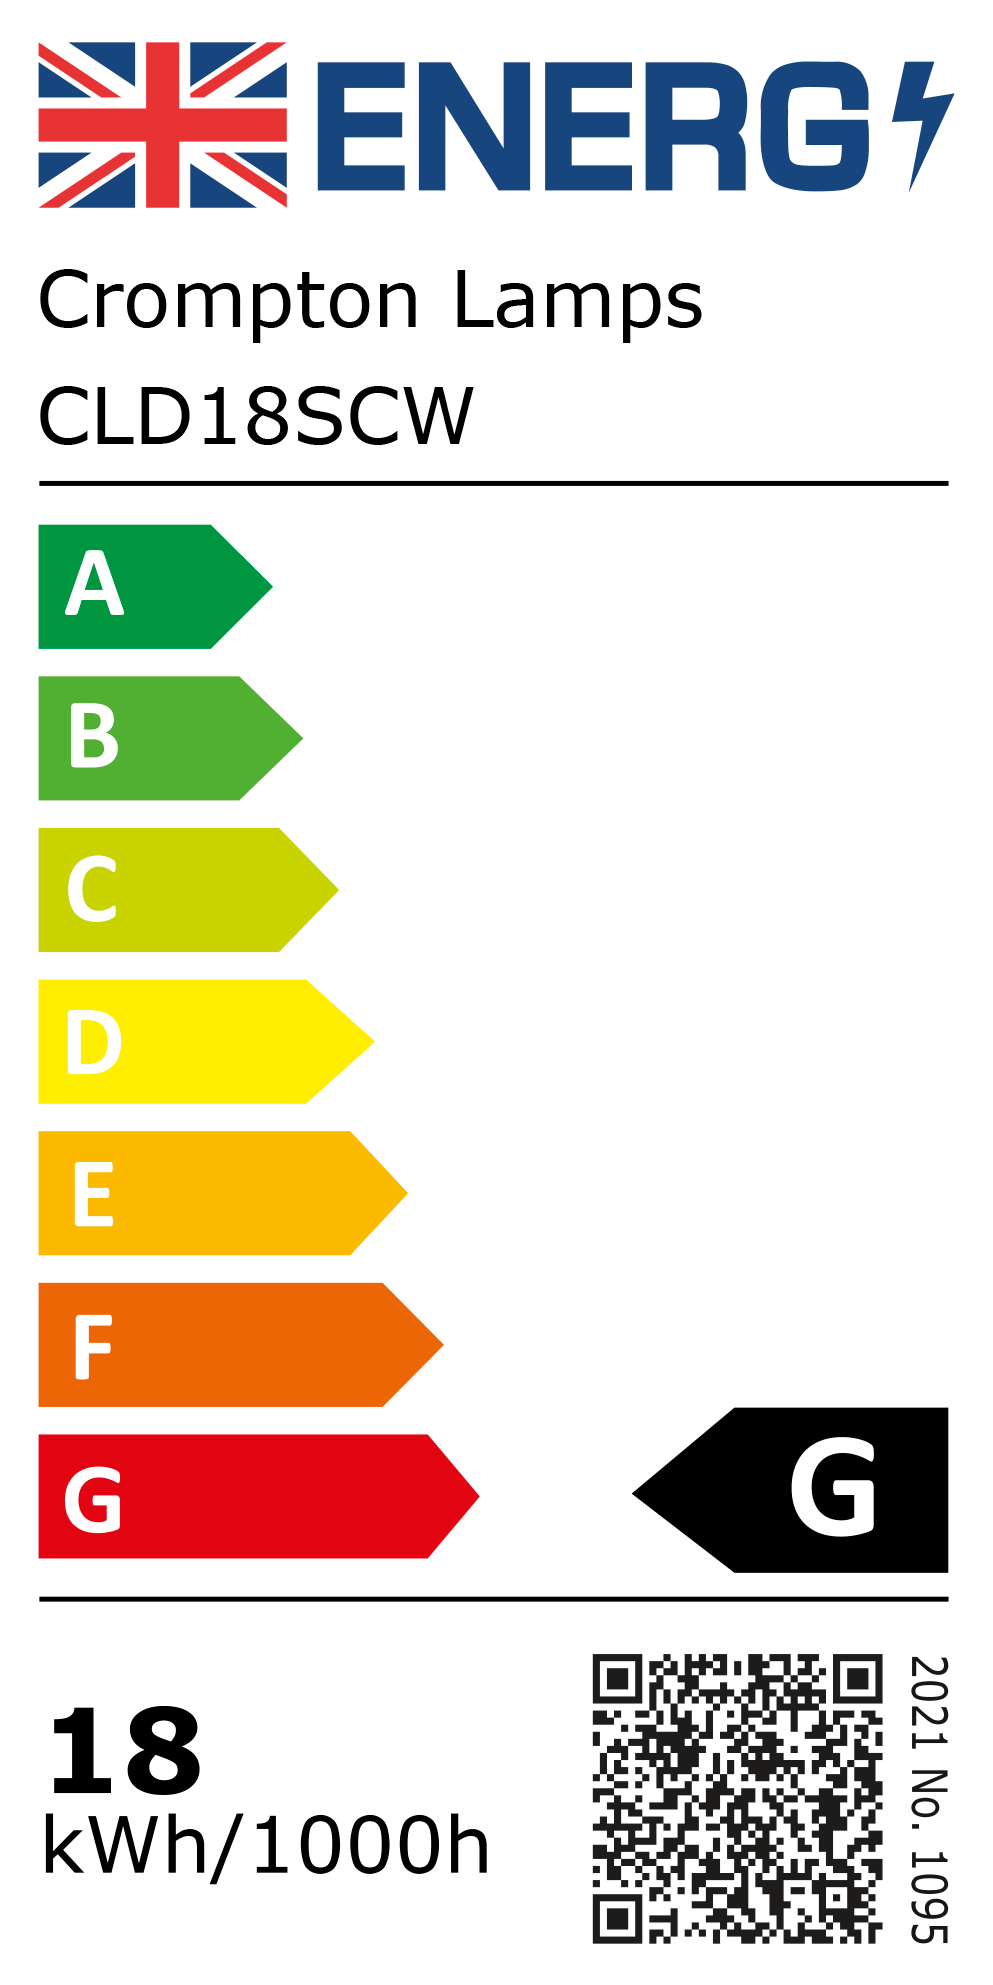 New 2021 Energy Rating Label: Stock Code CLD18SCW